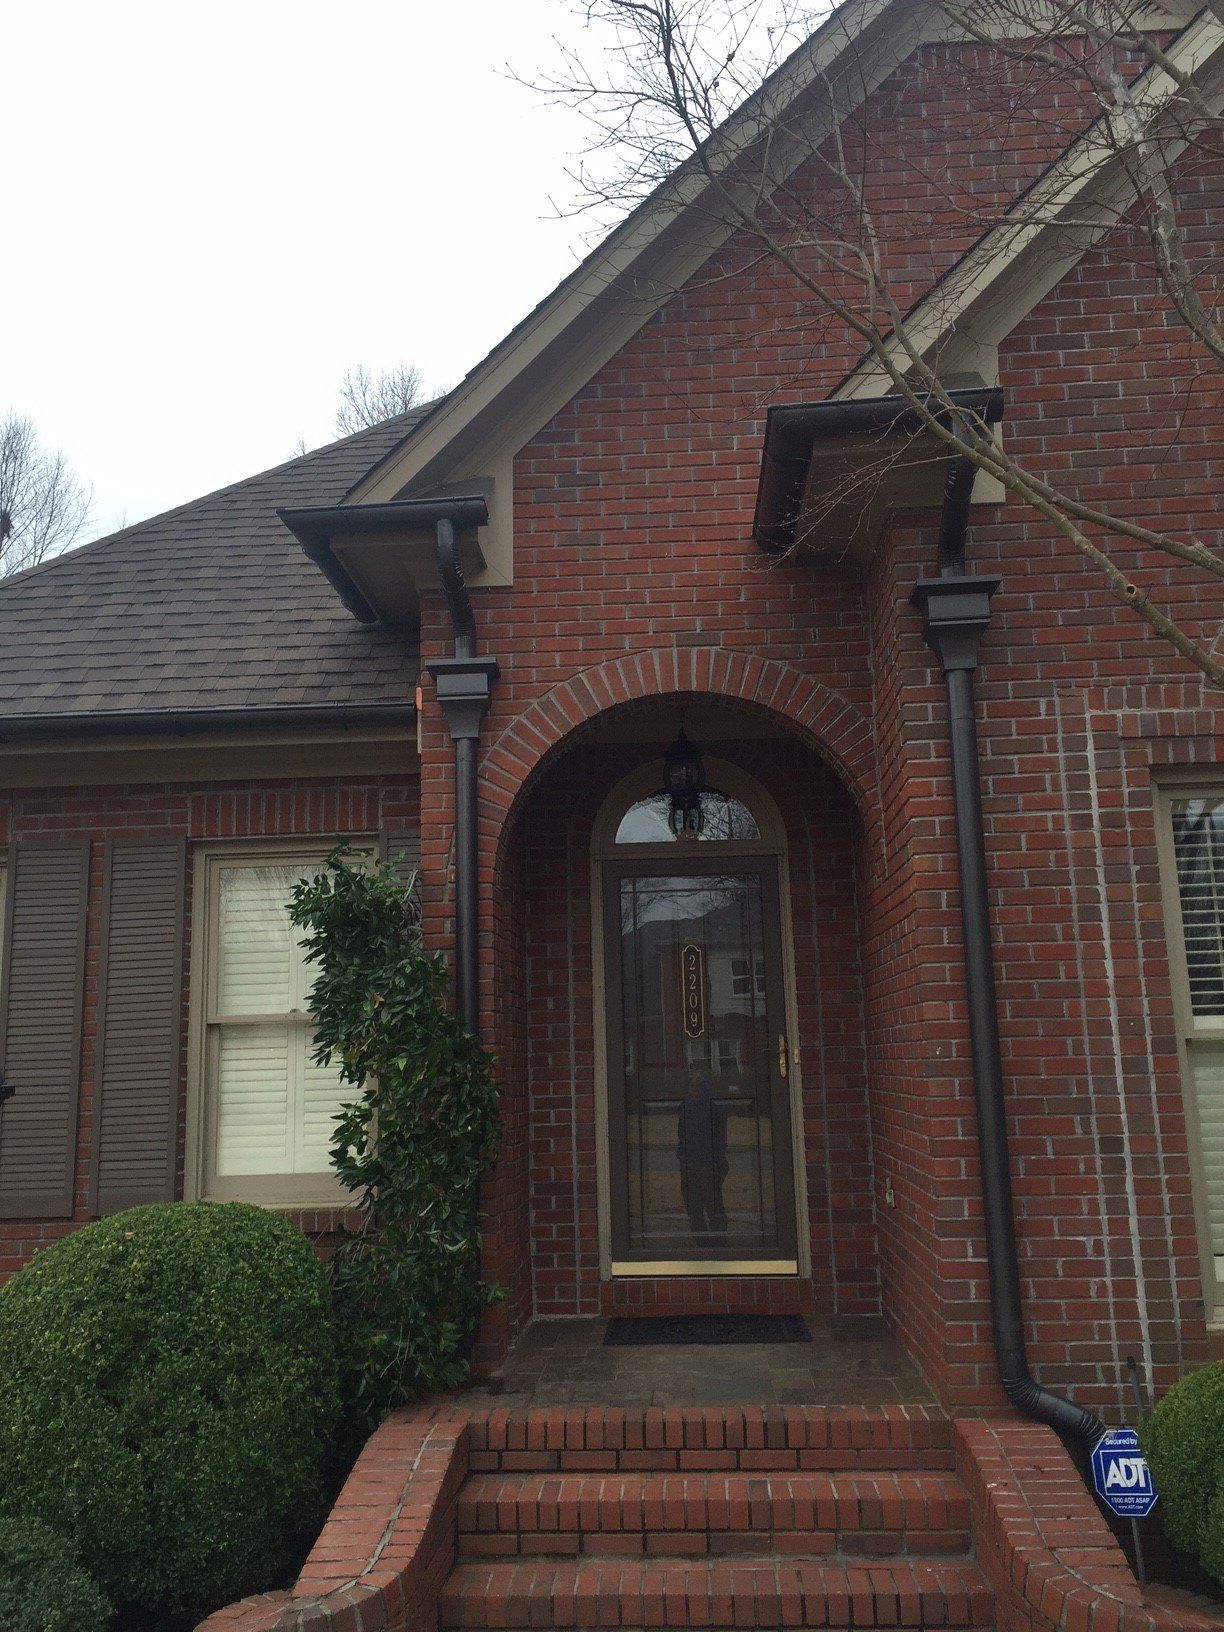 Front entrance to brick home - B & B Roofing in Decatur, AL